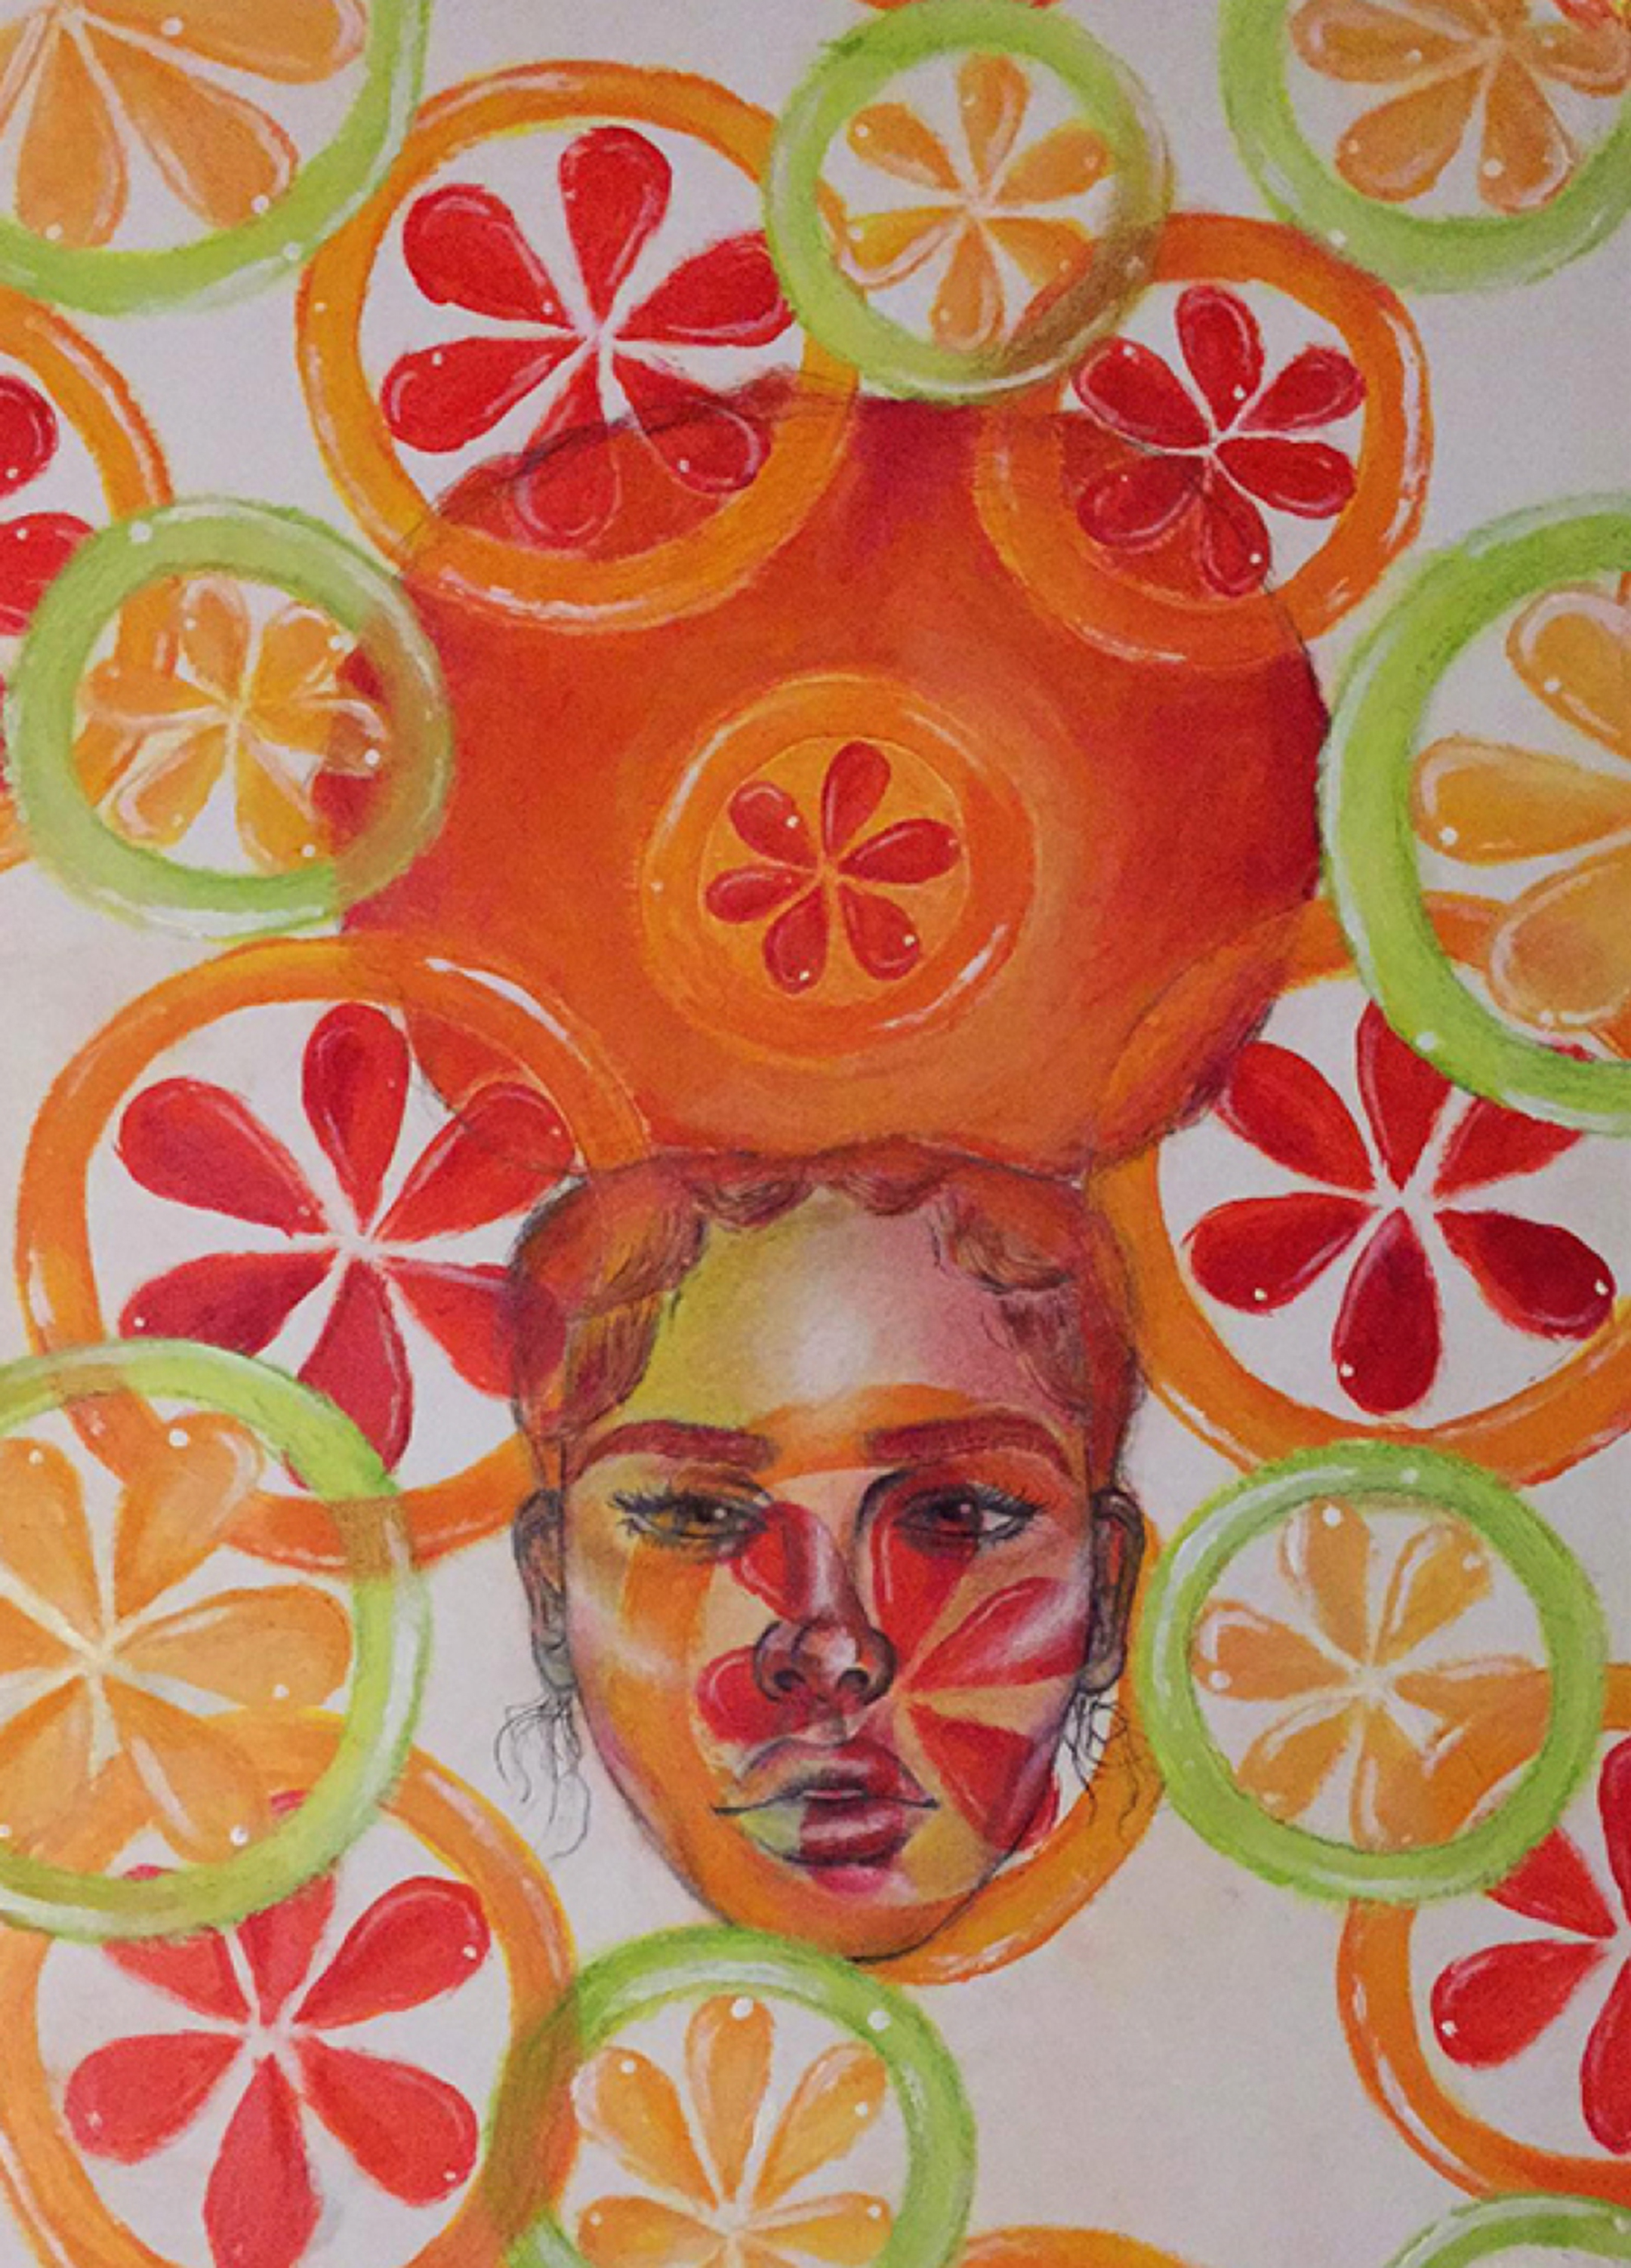 Painting of a young woman on a white background overlaid with multi-colored circles with shapes inside that make them look like slices of orange or lemon